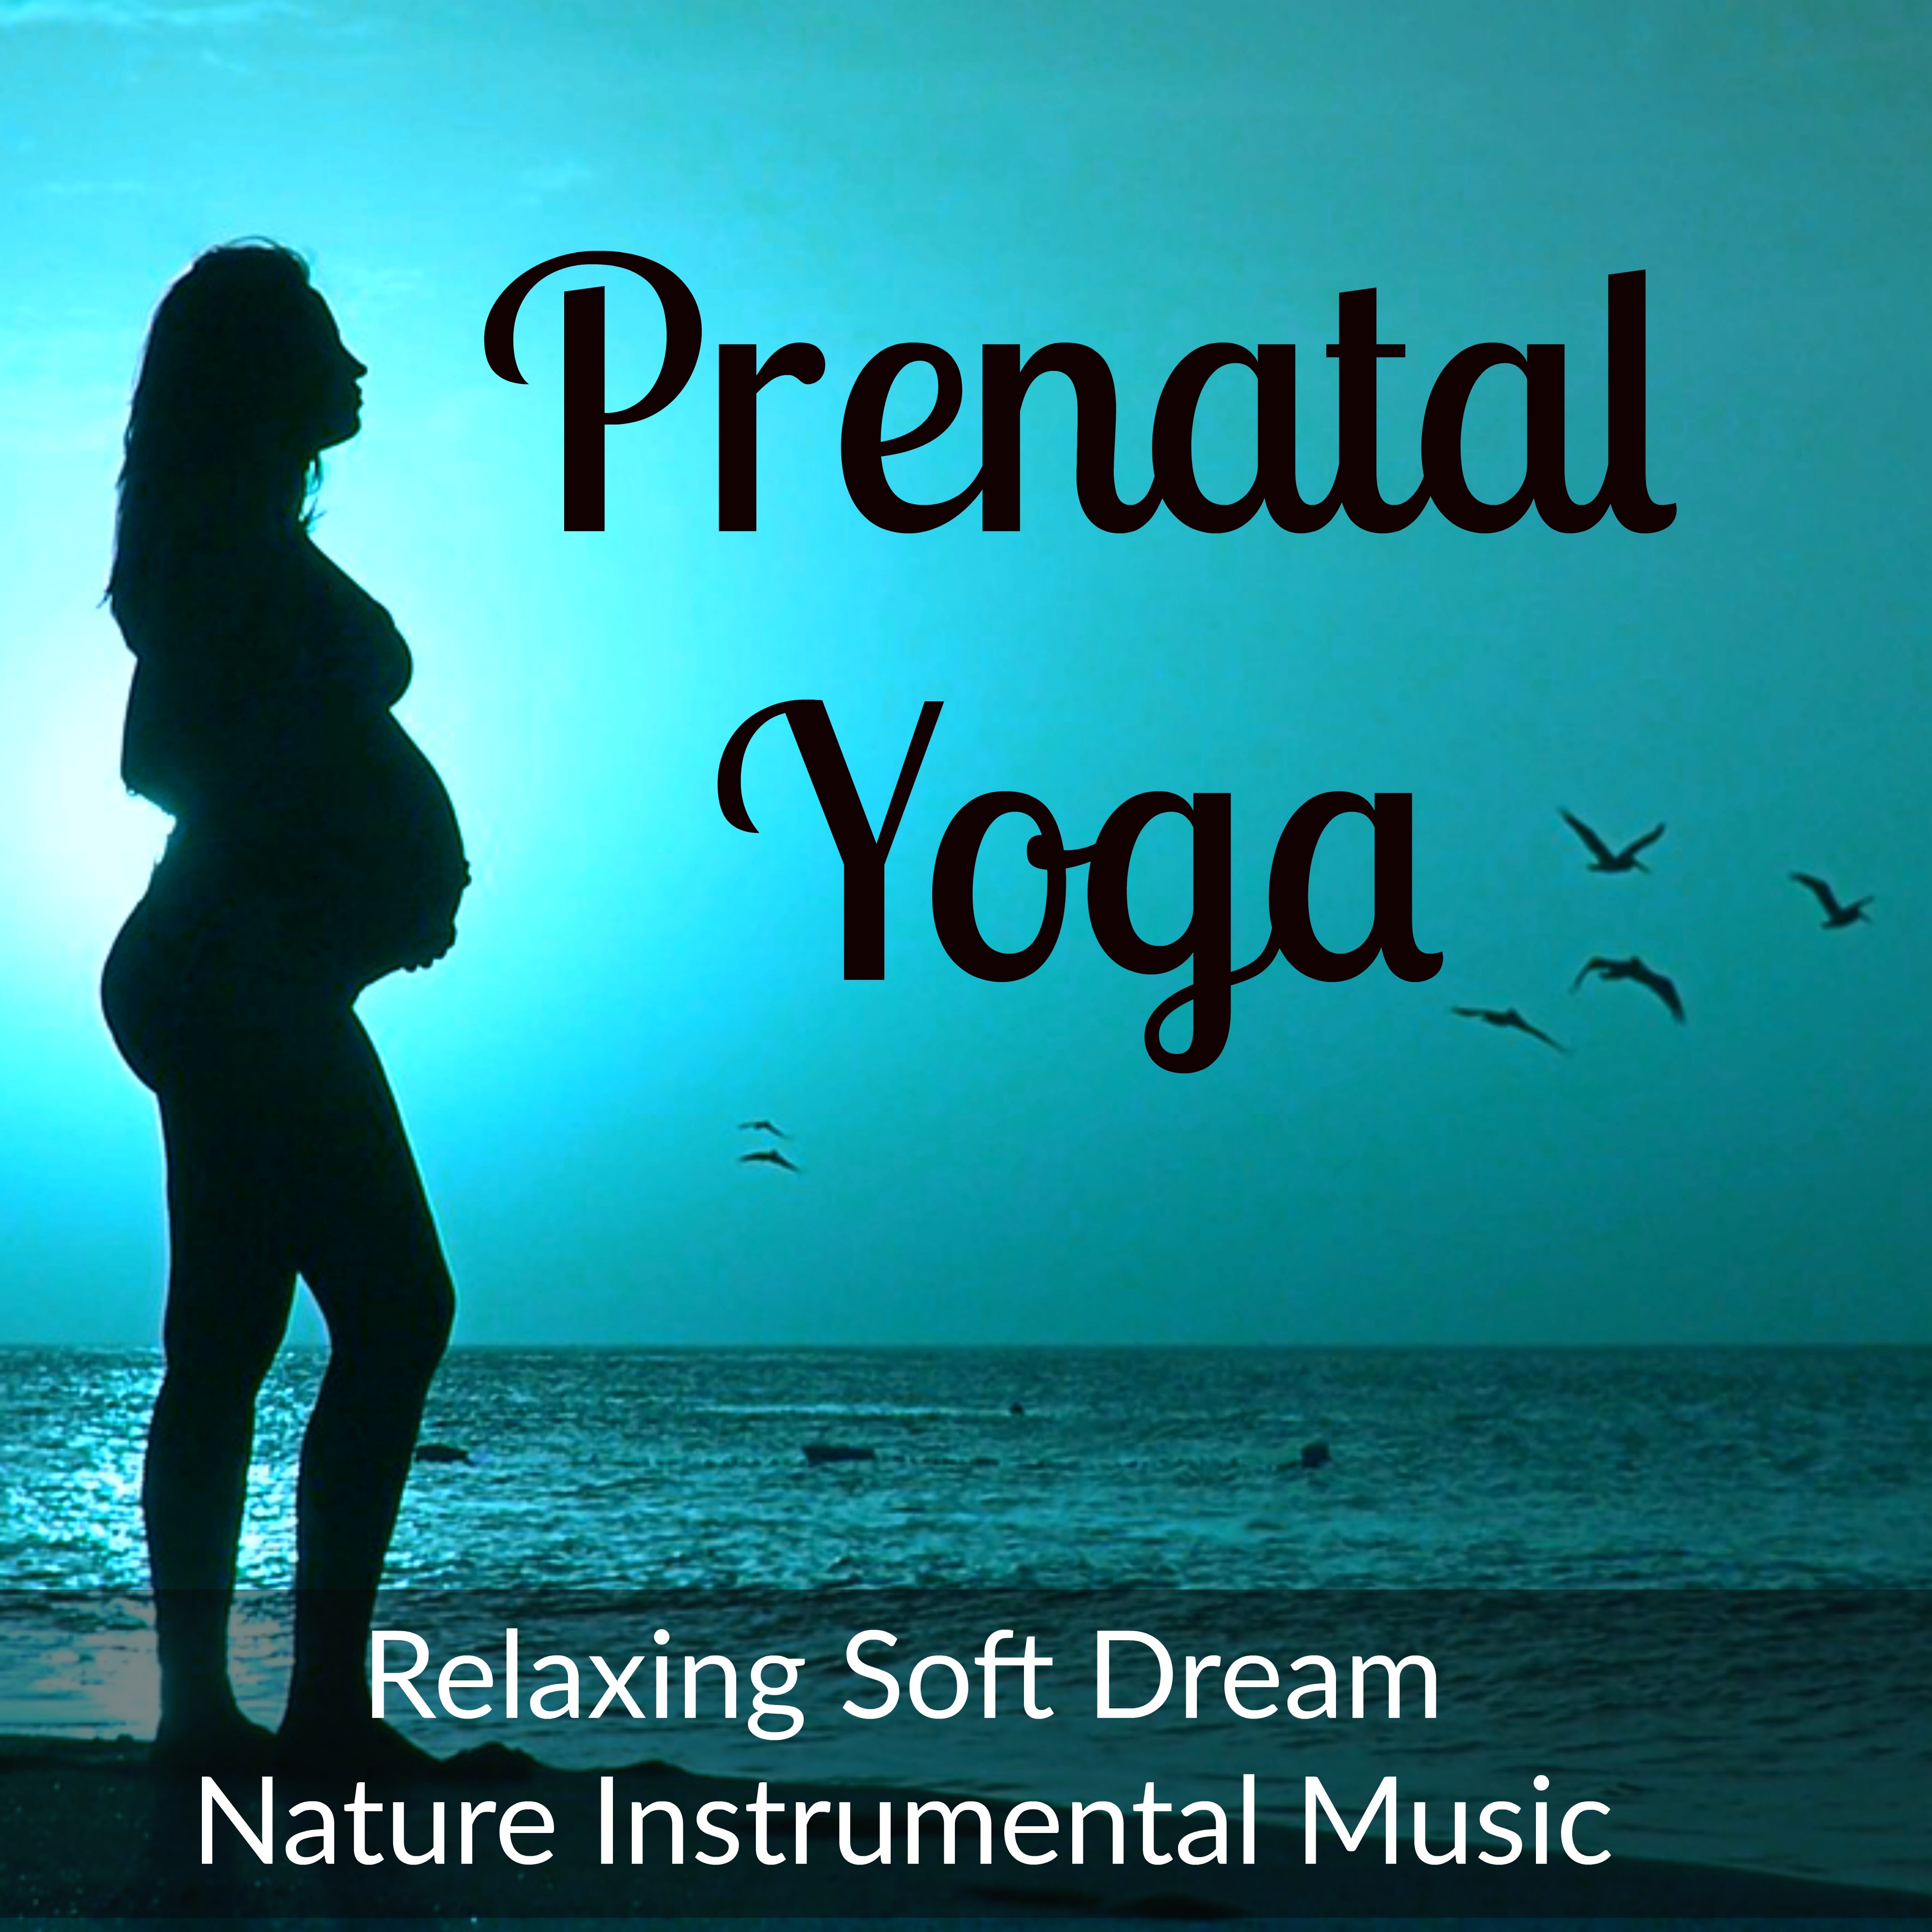 Prenatal Yoga - Relaxing Soft Dream Nature Instrumental Music for Sweet Lullaby Perfect Night Health and Wellbeing